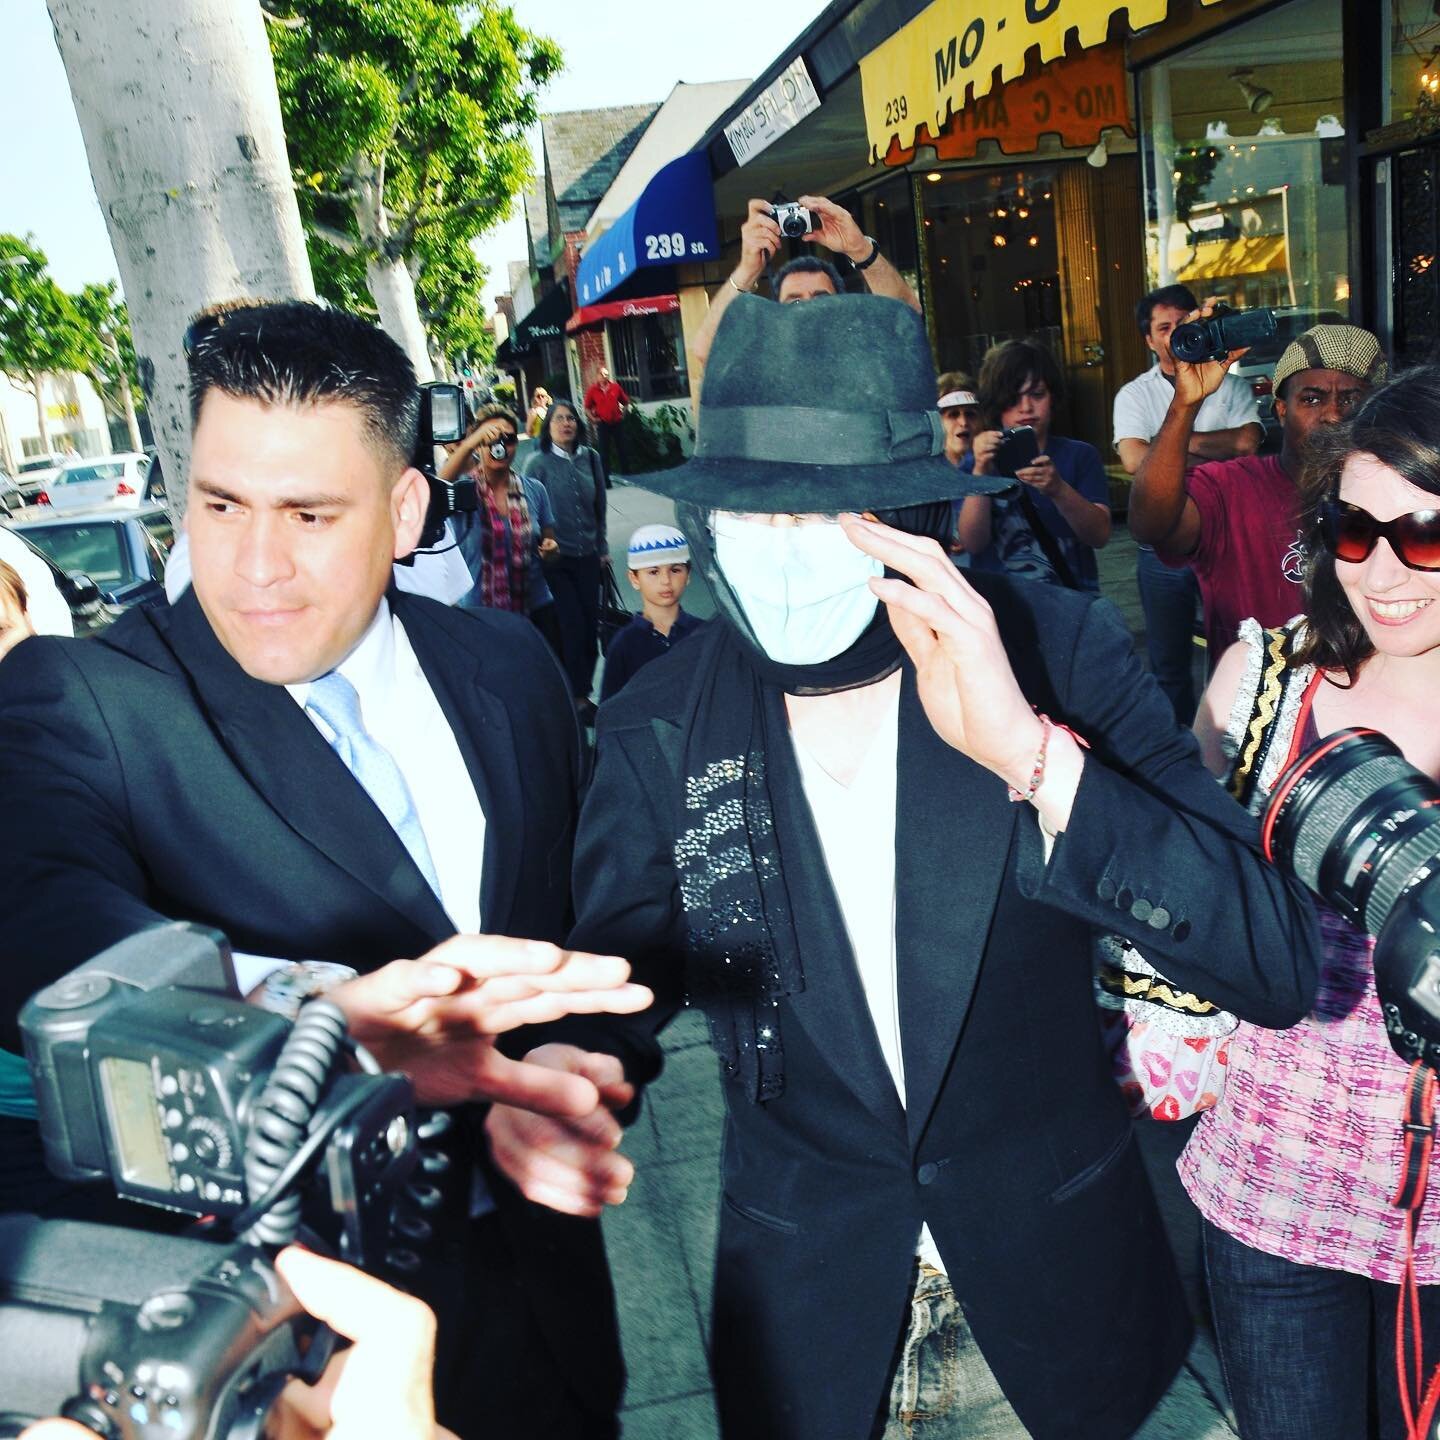 Out and about: Alberto, Michael and me on the streets of Beverly Hills, California, in April 2009. Read what it was like to be out and about with Michael during that time in my new memoir, &lsquo;A real-life fairy tale: Michael Jackson and me.&rsquo;